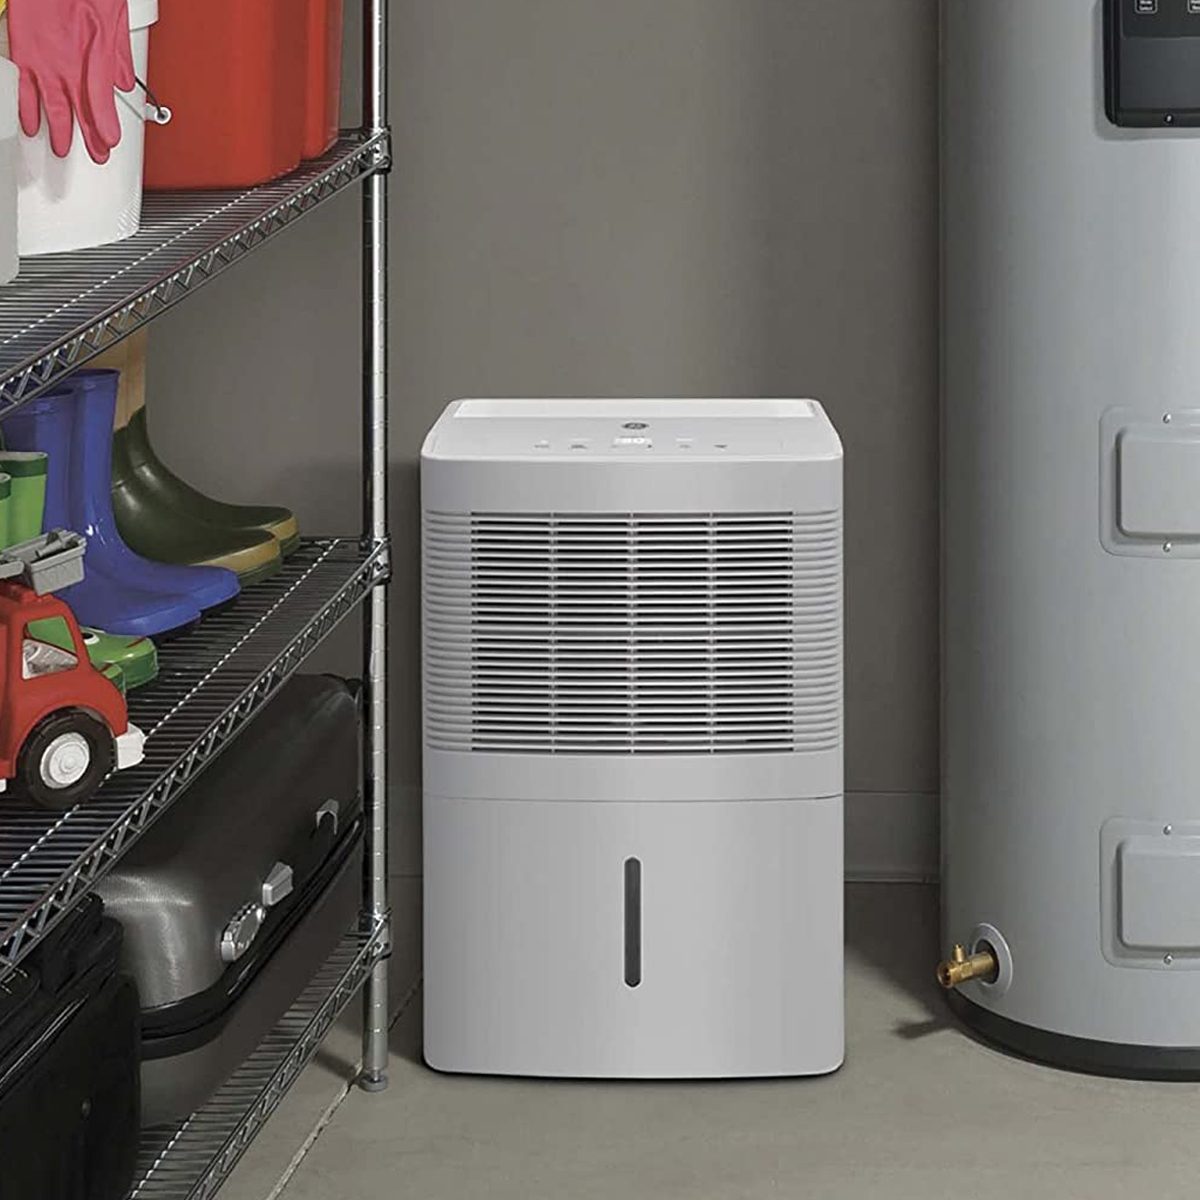 Ge Appliances Ge Dehumidifier 20 Pint, Ideal For High Humidity Areas Complete With Empty Bucket Alarm Ecomm Amazon.com